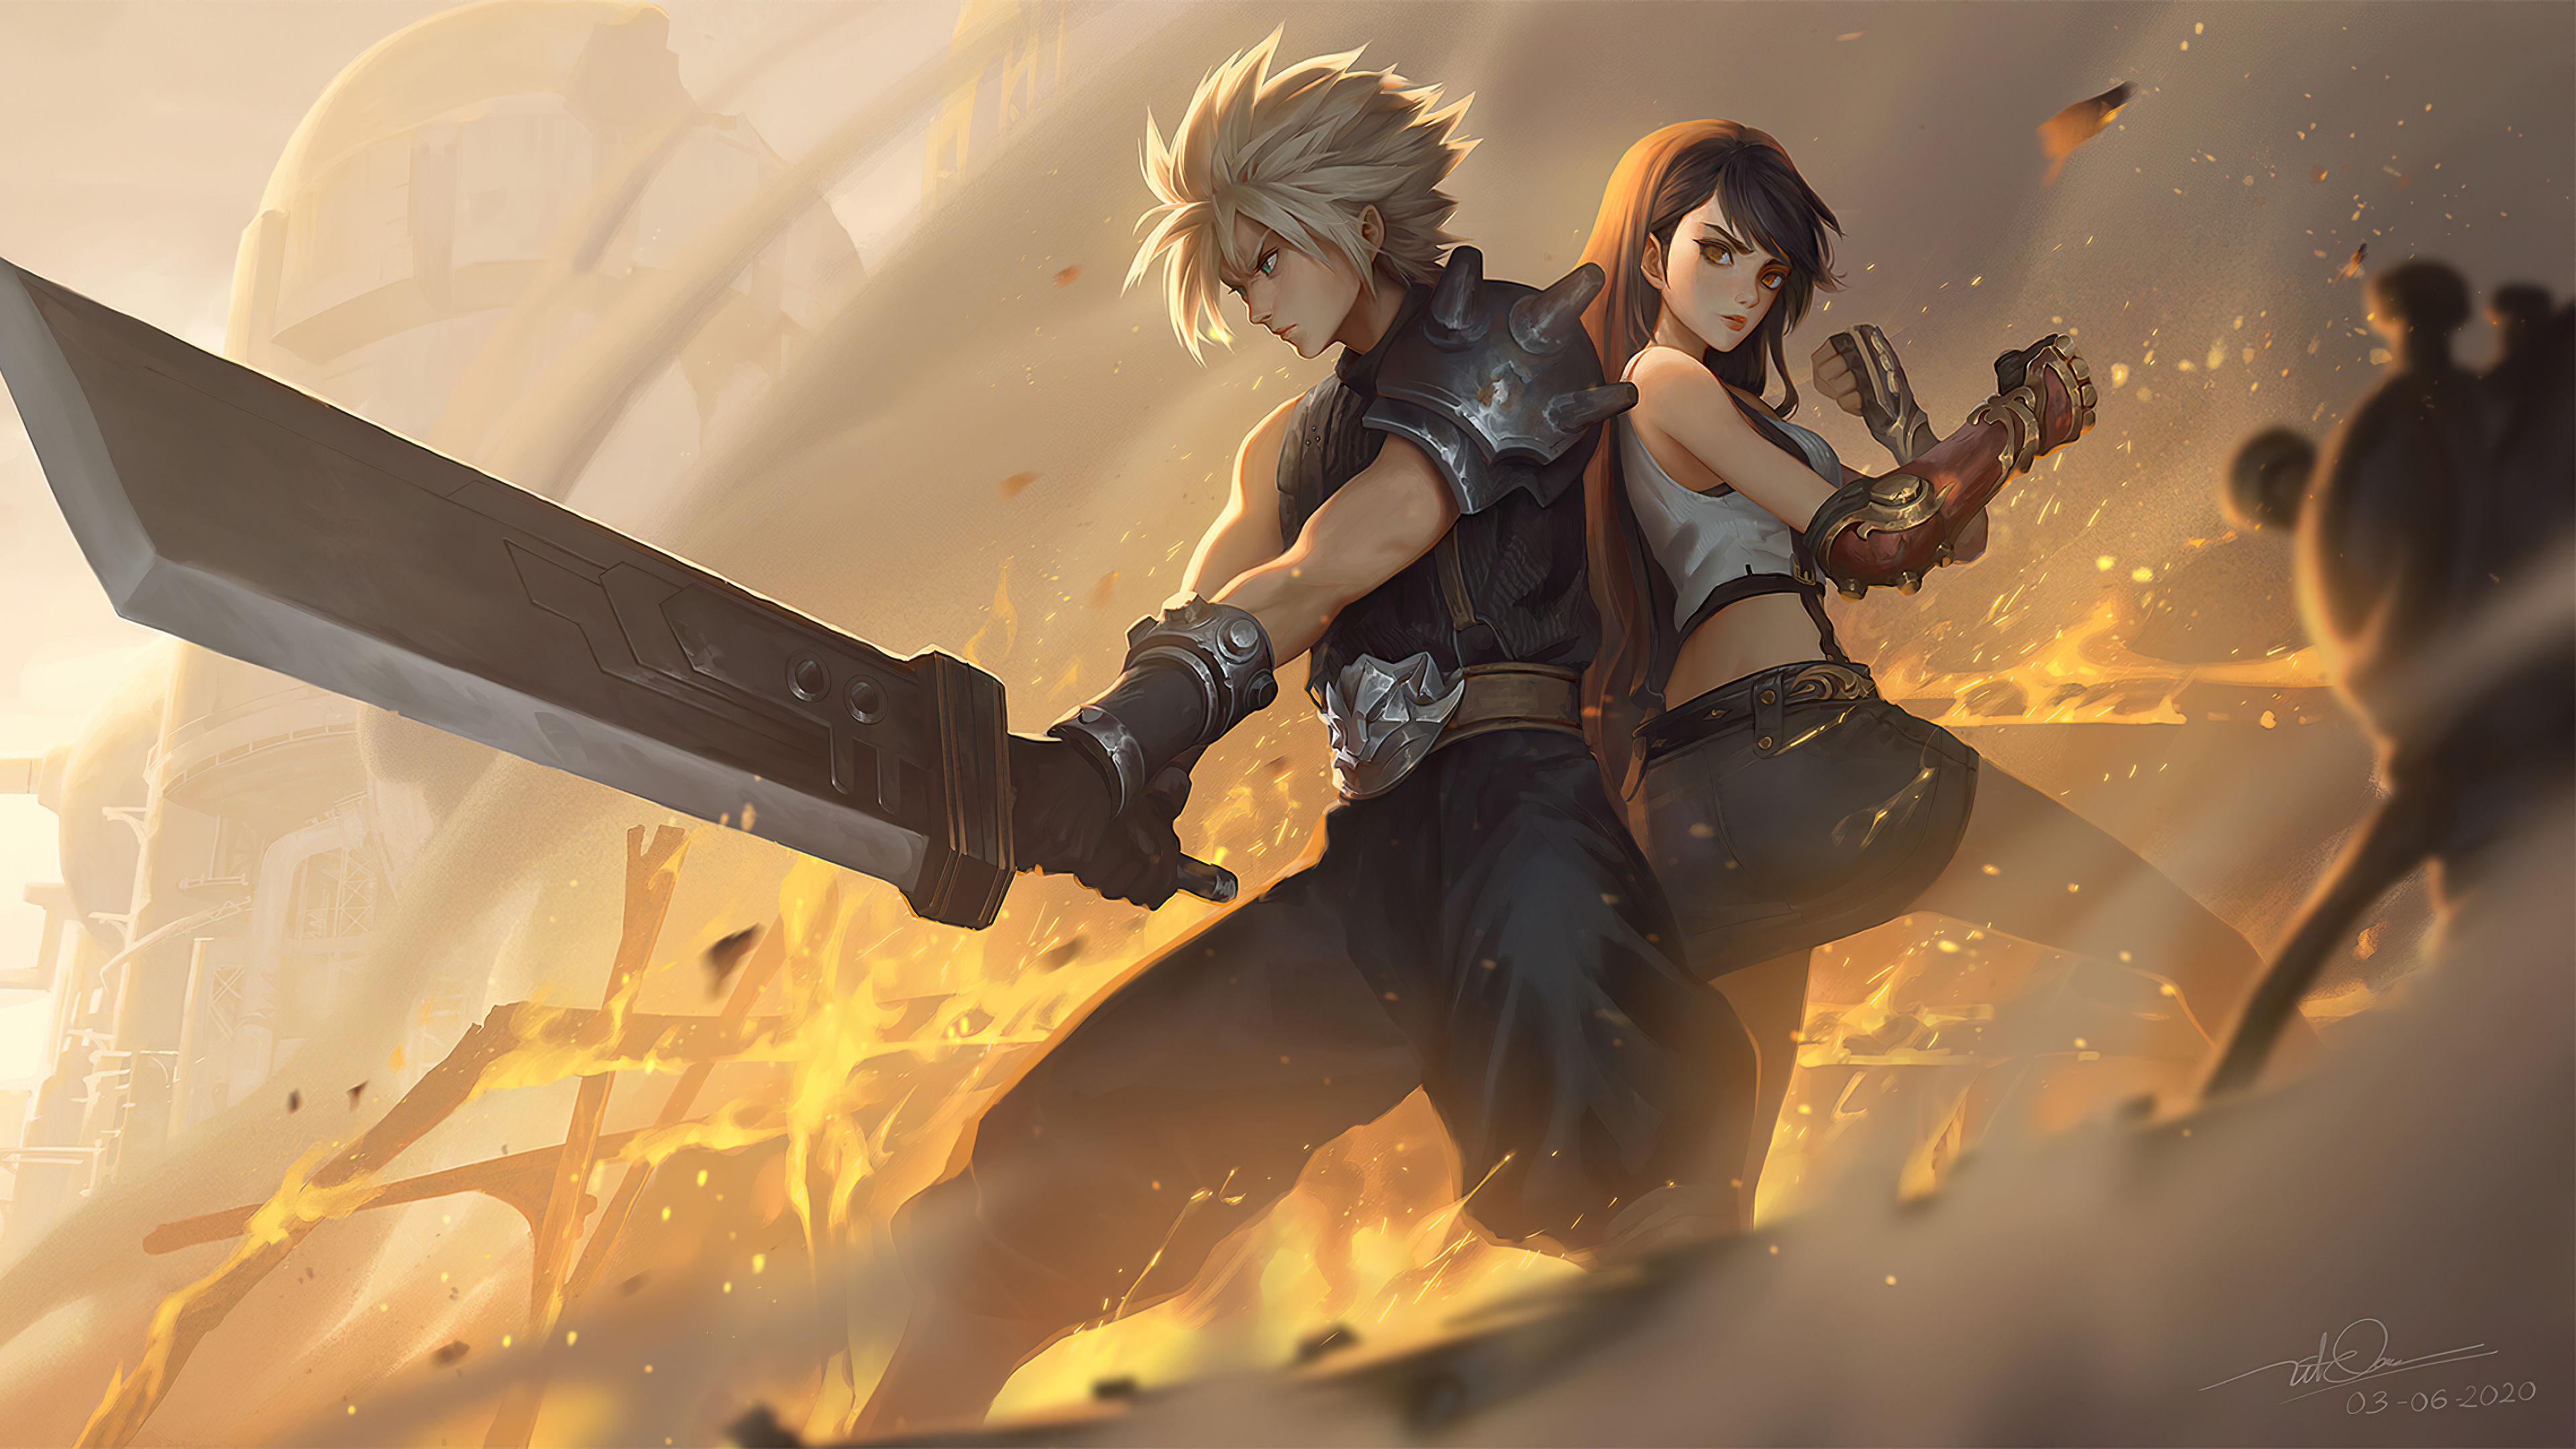 3840x2160 Cloud Strife And Tifa Lockhart 4k Final Fantasy 4k Wallpaper Hd Games 4k Wallpapers Images Photos And Background Wallpapers Den